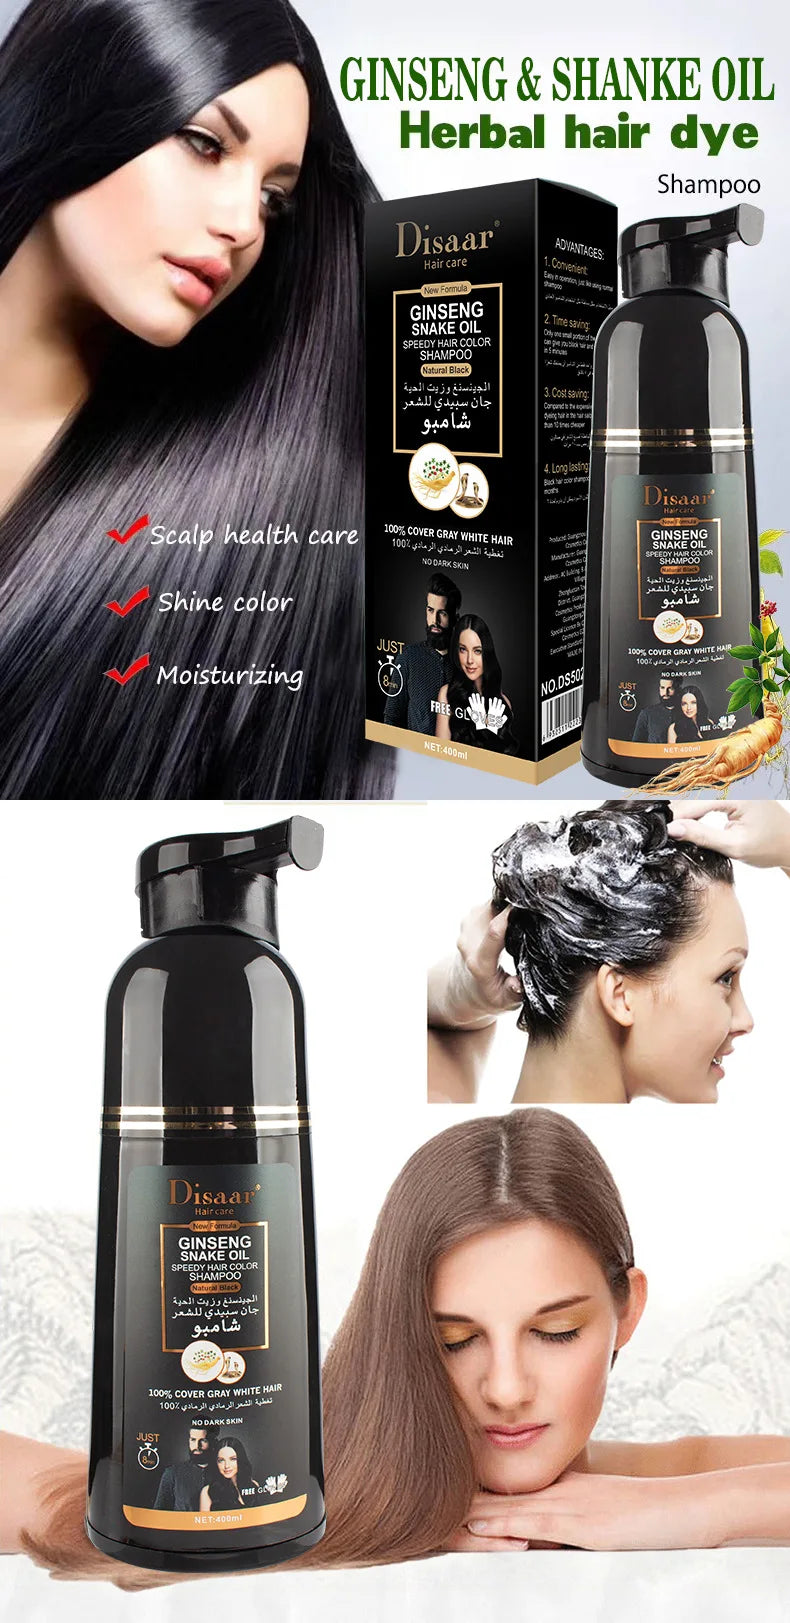 Natural Ginseng Essence Instant Black Hair Shampoo/Dye. Hair Color Cream for Men and Women in 4 Colors.